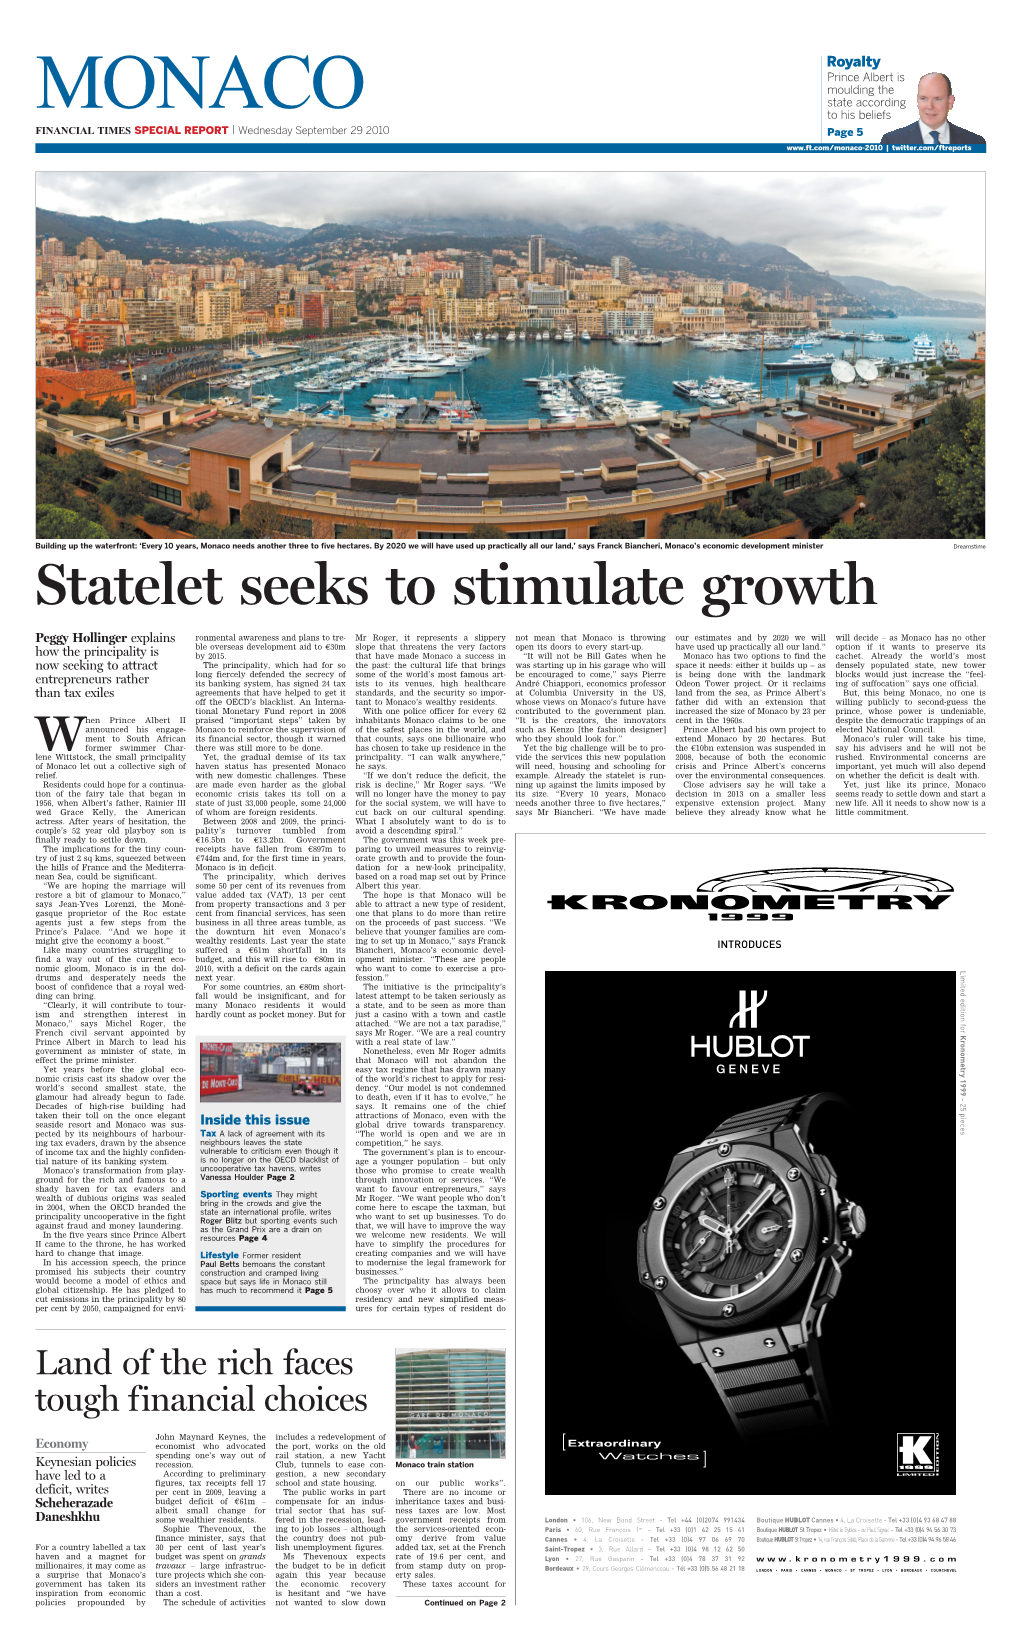 Statelet Seeks to Stimulate Growth